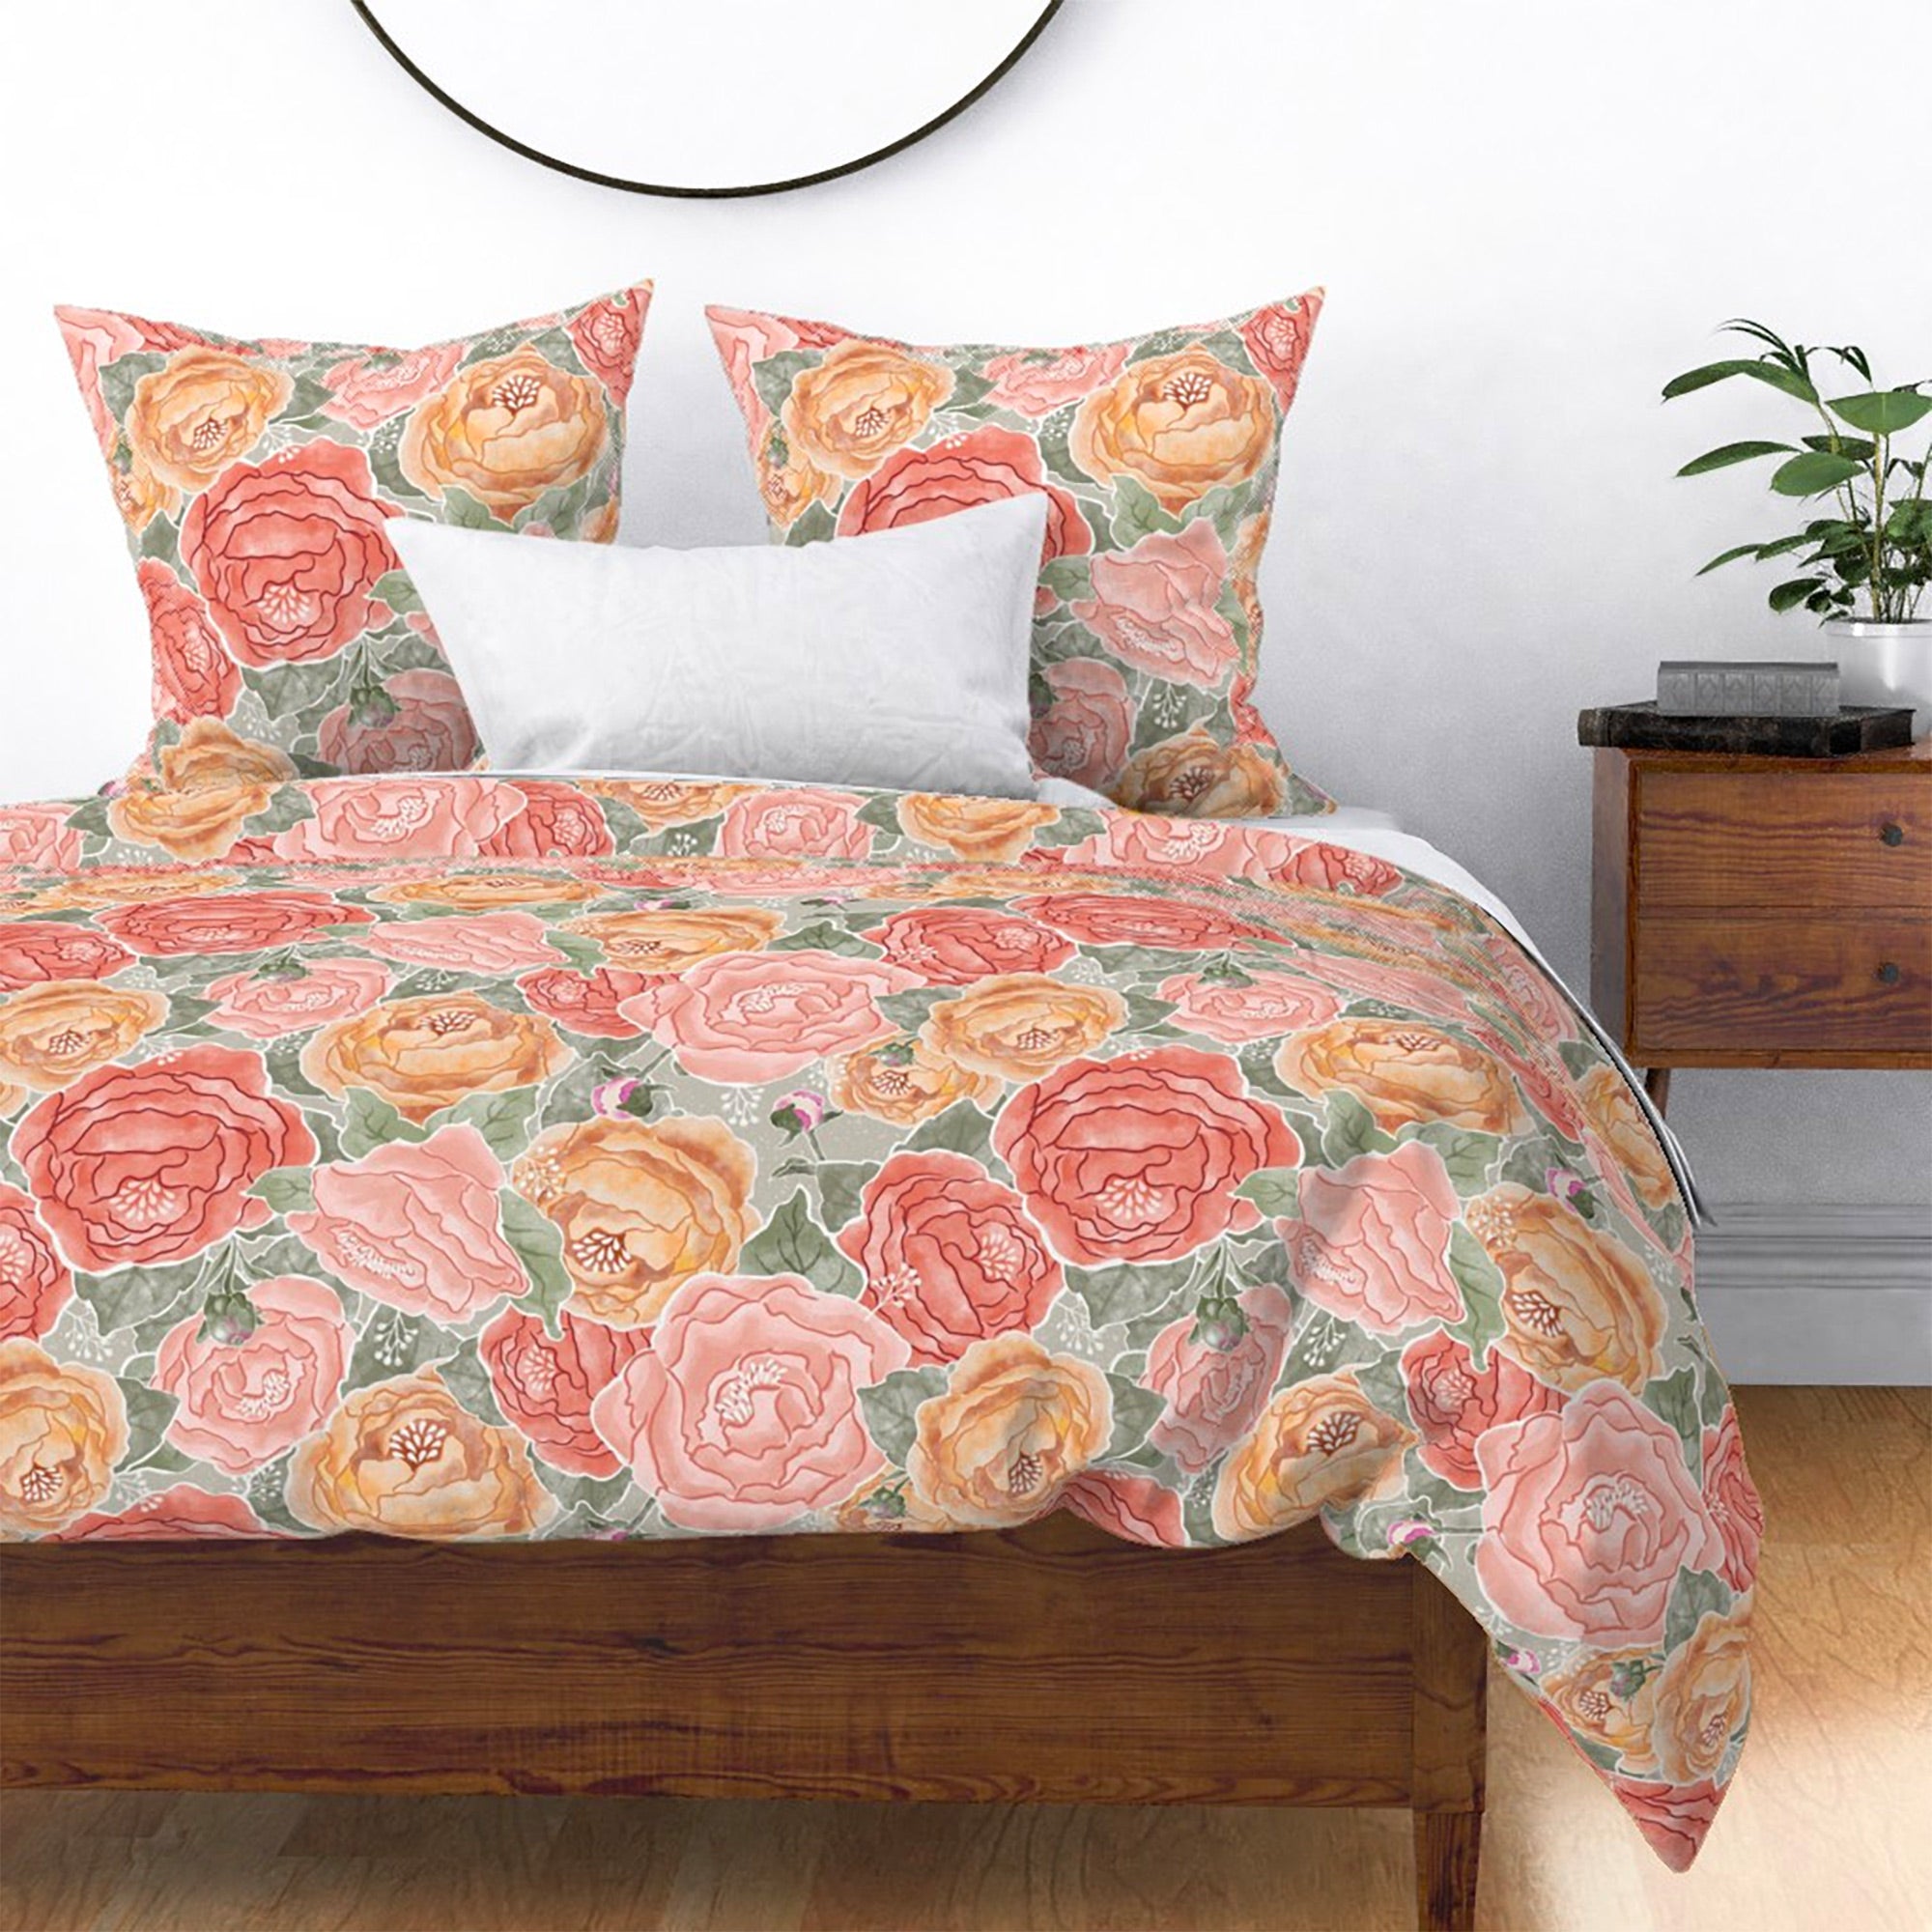 Pretty in Peony Bedding Collection with Sage Background duvet cover and shams